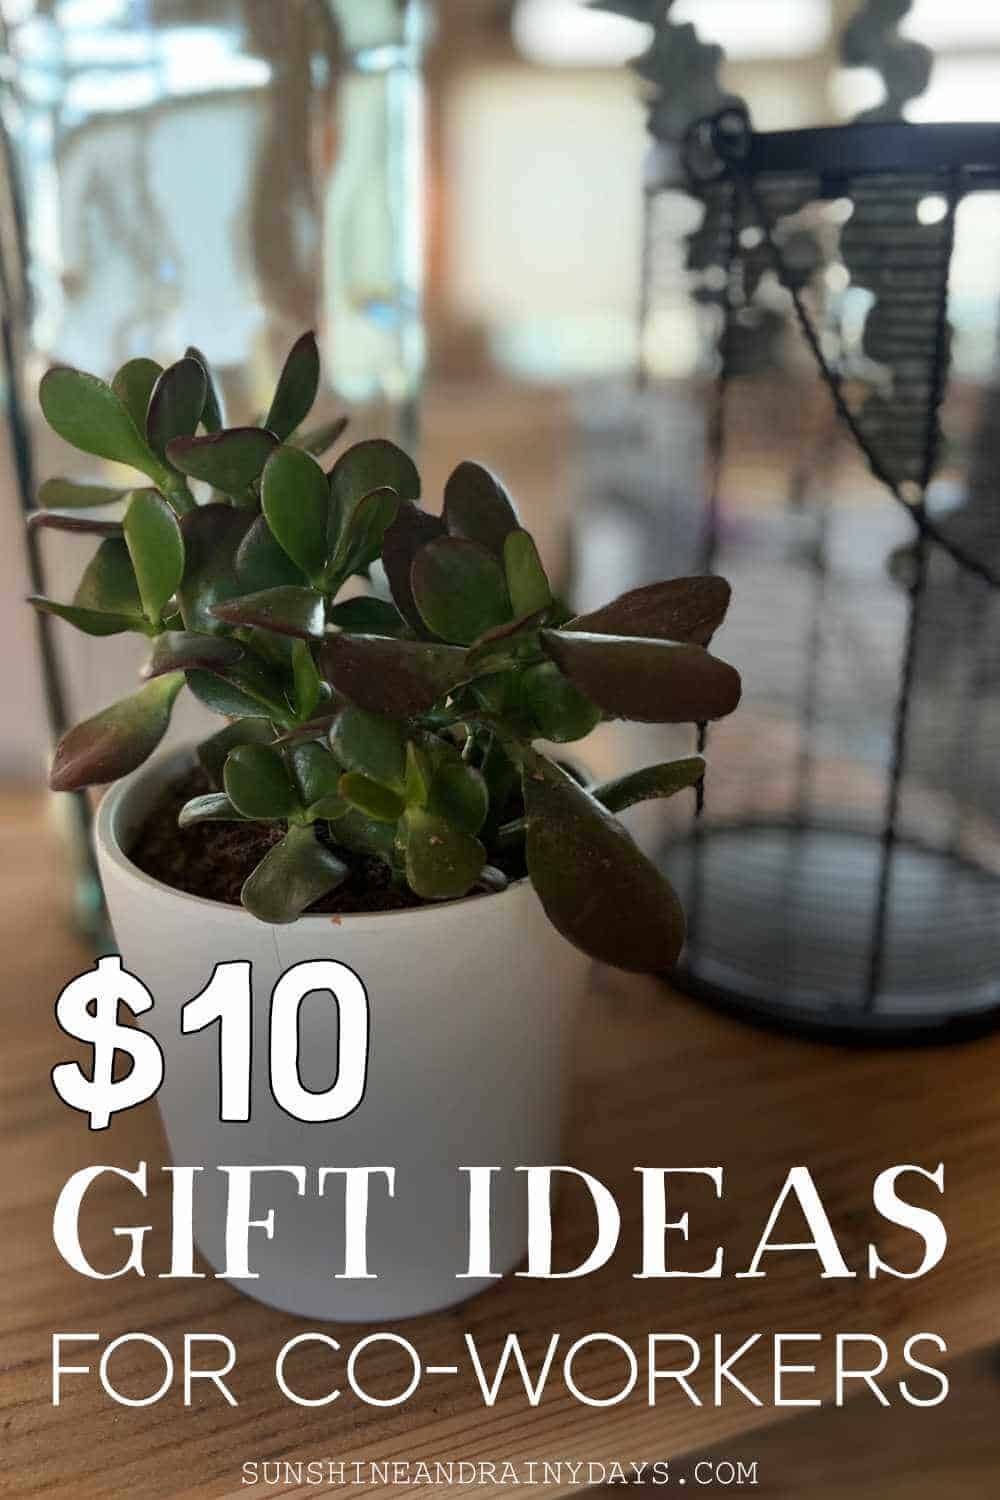 $10 Gift Ideas For Co-Workers